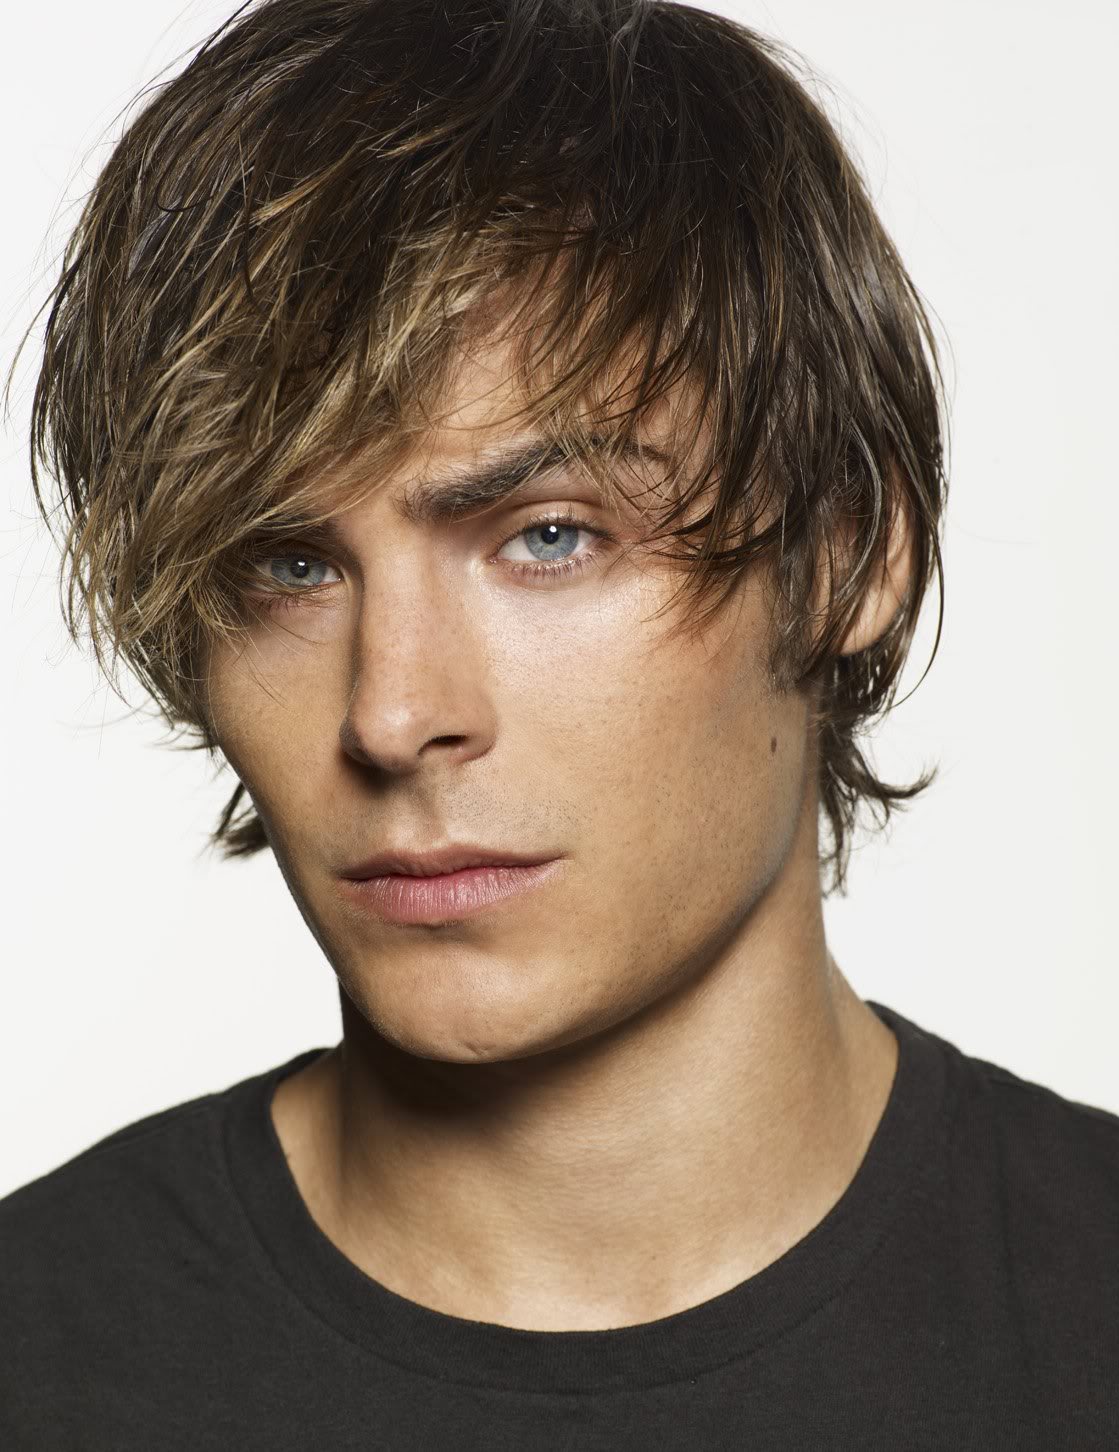 Sample Best Hairstyles For Thick Straight Hair Male for Rounded Face